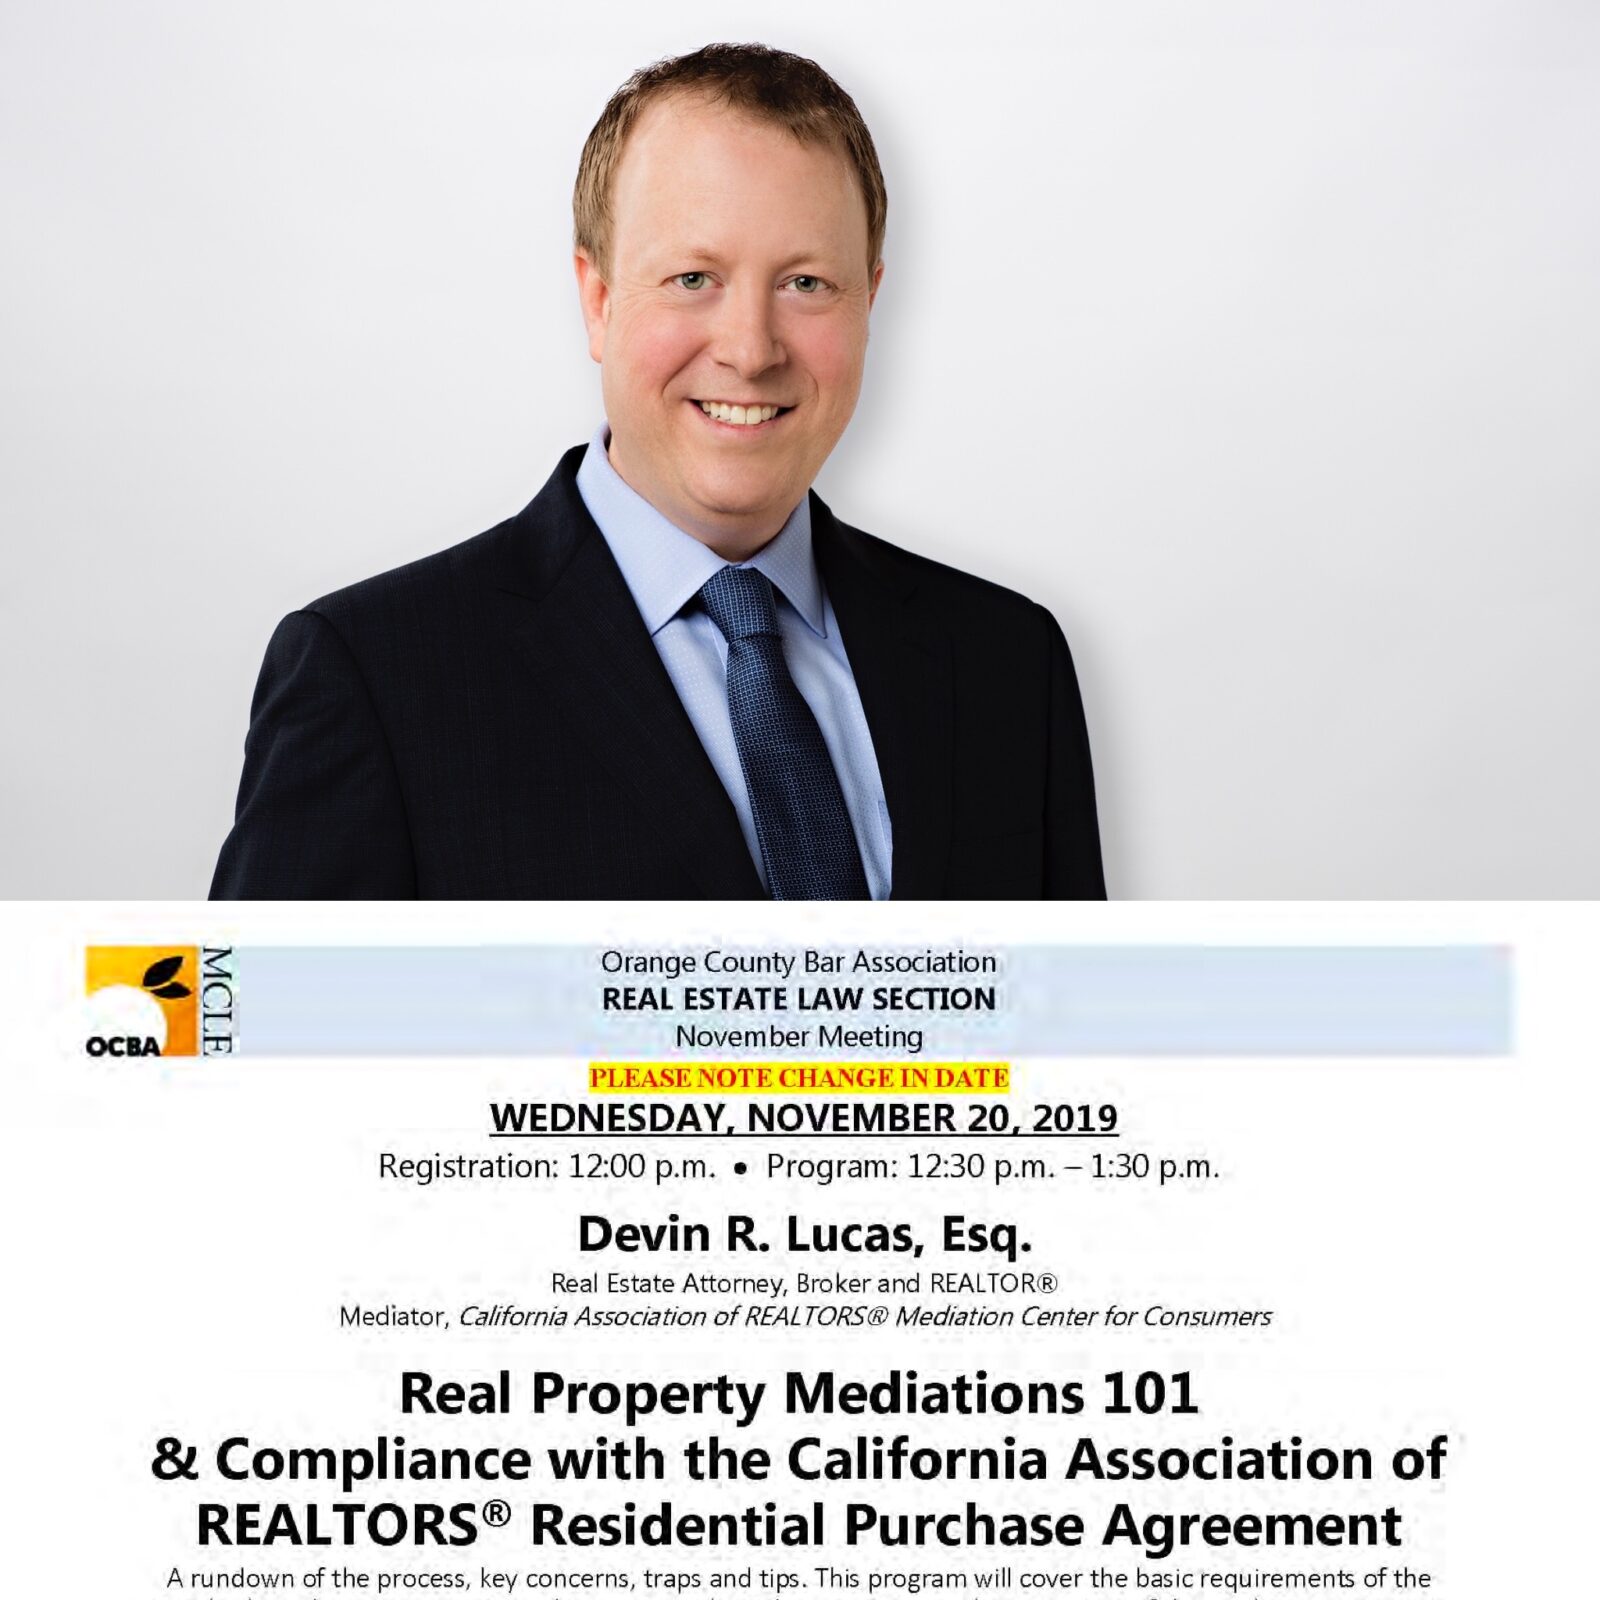 DEVIN LUCAS PRESENTS to the Orange County Bar Association on Real Estate Mediations